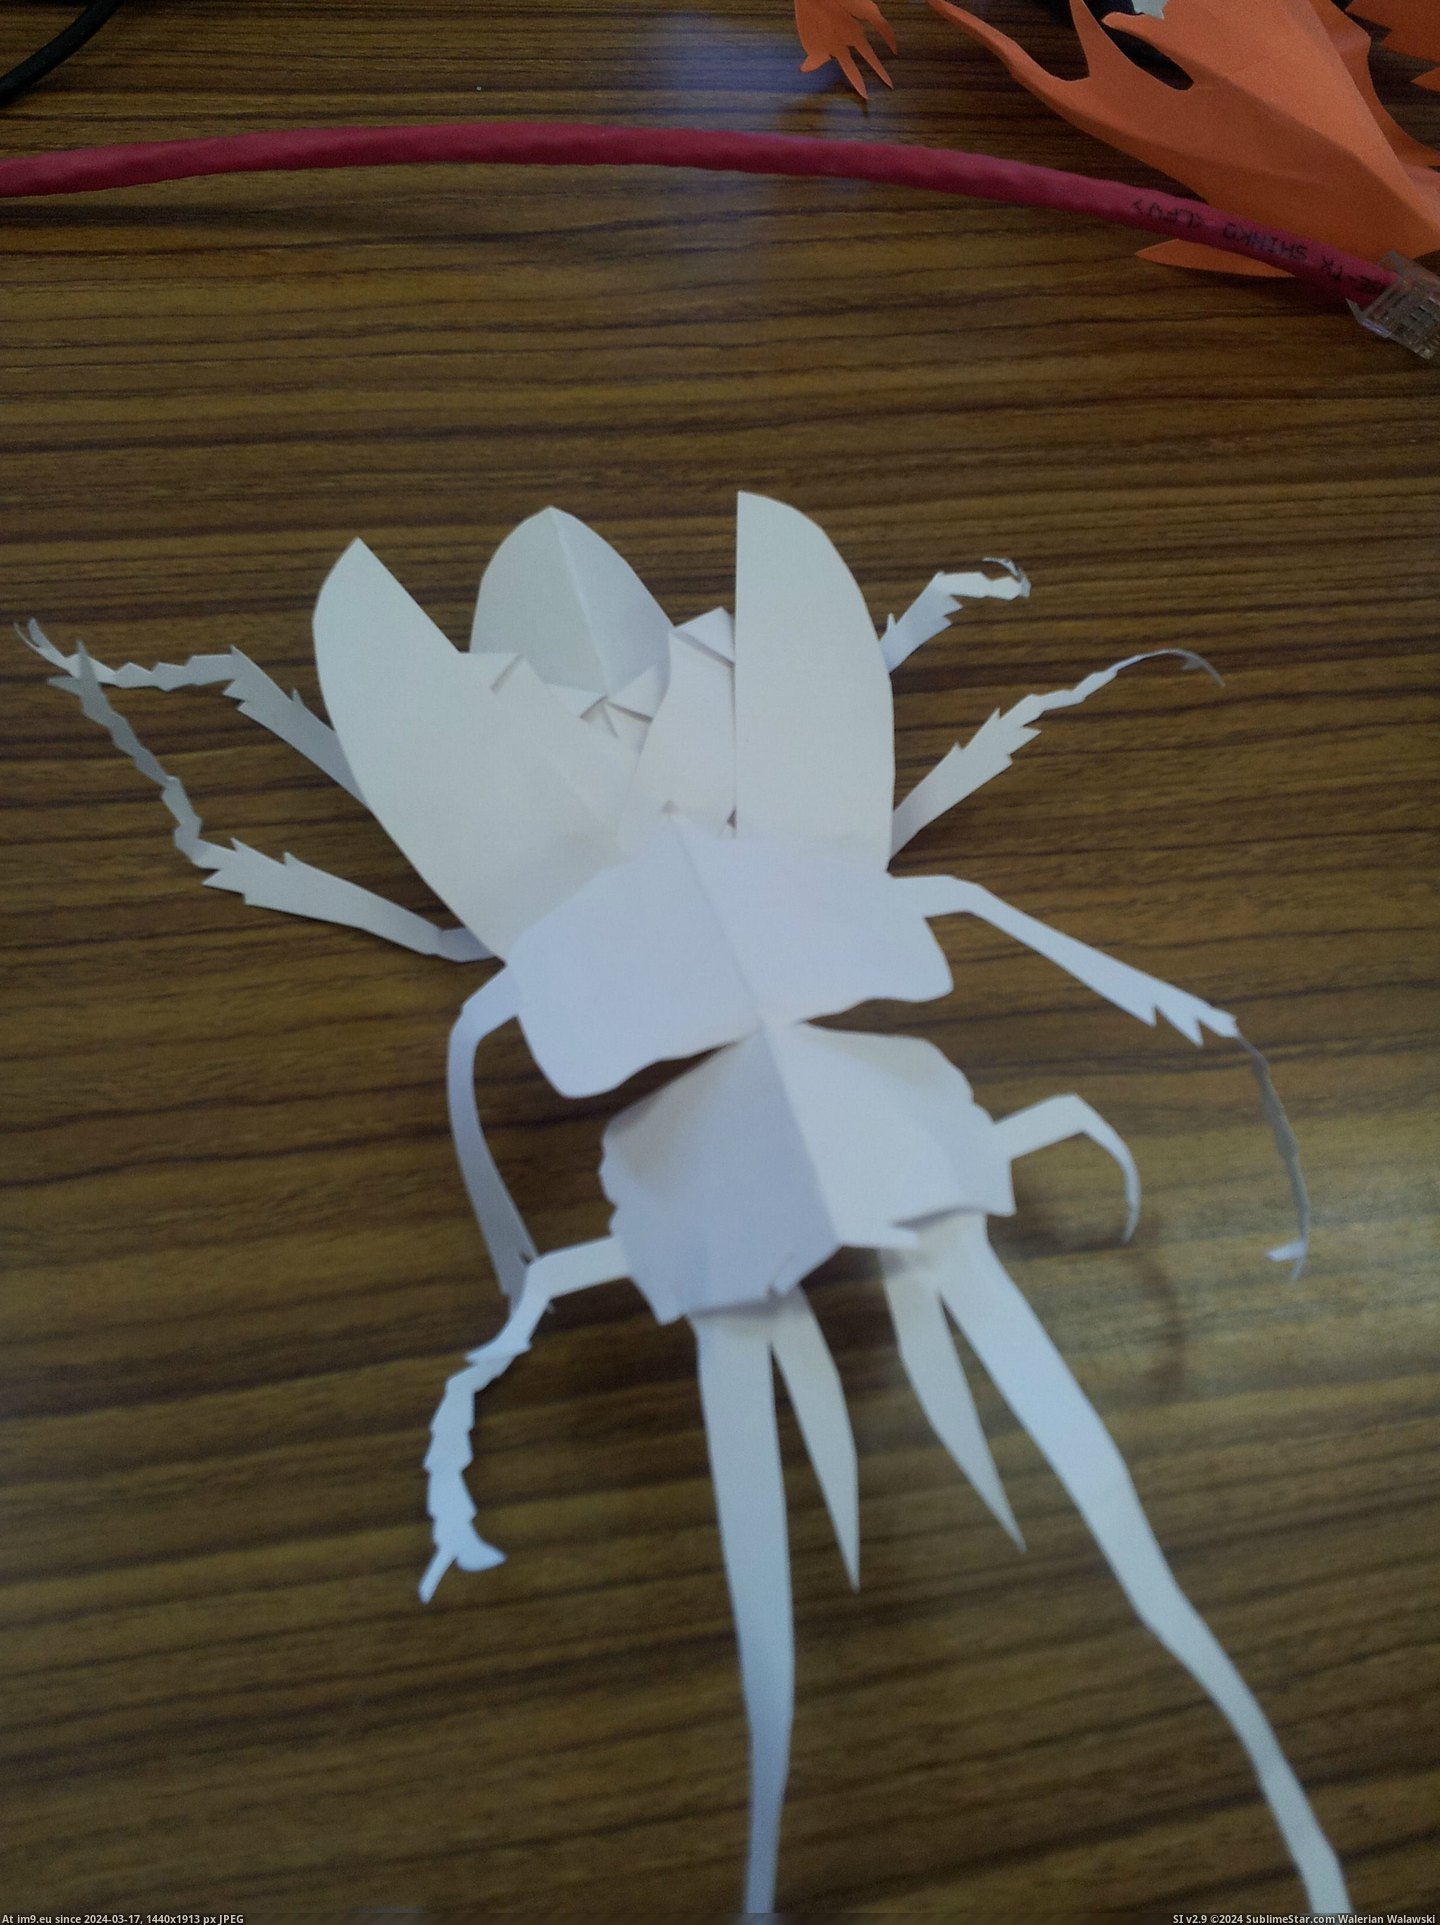 #One #Paper #Students #Creatures #Freehand #Bored #Completely [Pics] One of my students makes these creatures out of paper completely freehand whenever he is bored 9 Pic. (Image of album My r/PICS favs))